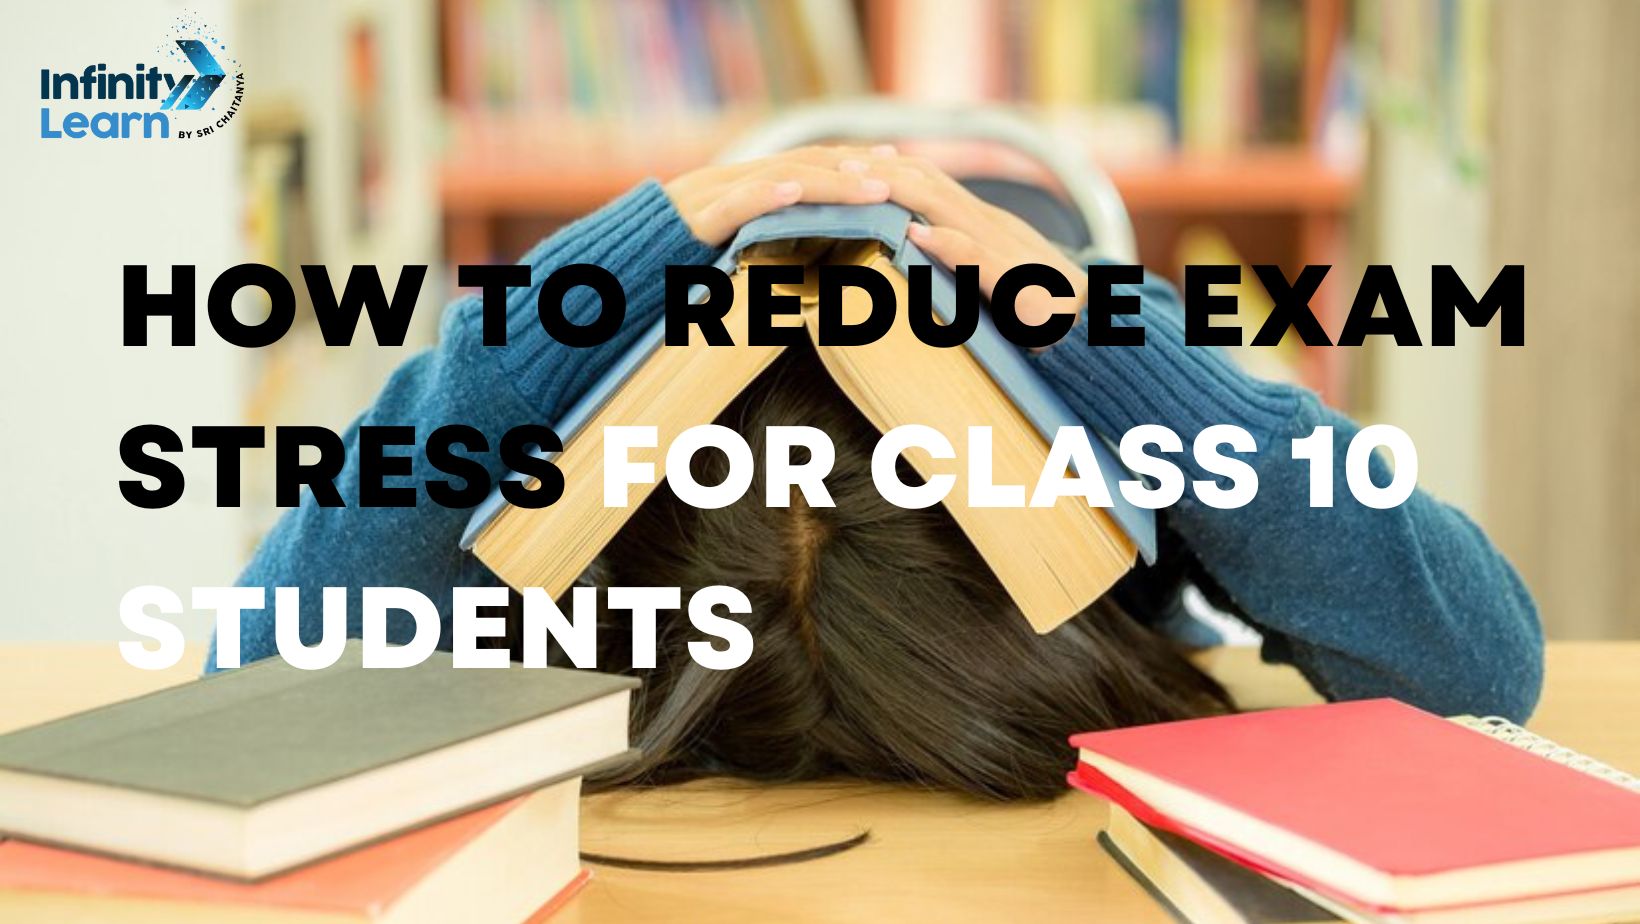 How to Reduce Exam Stress for Class 10 Students